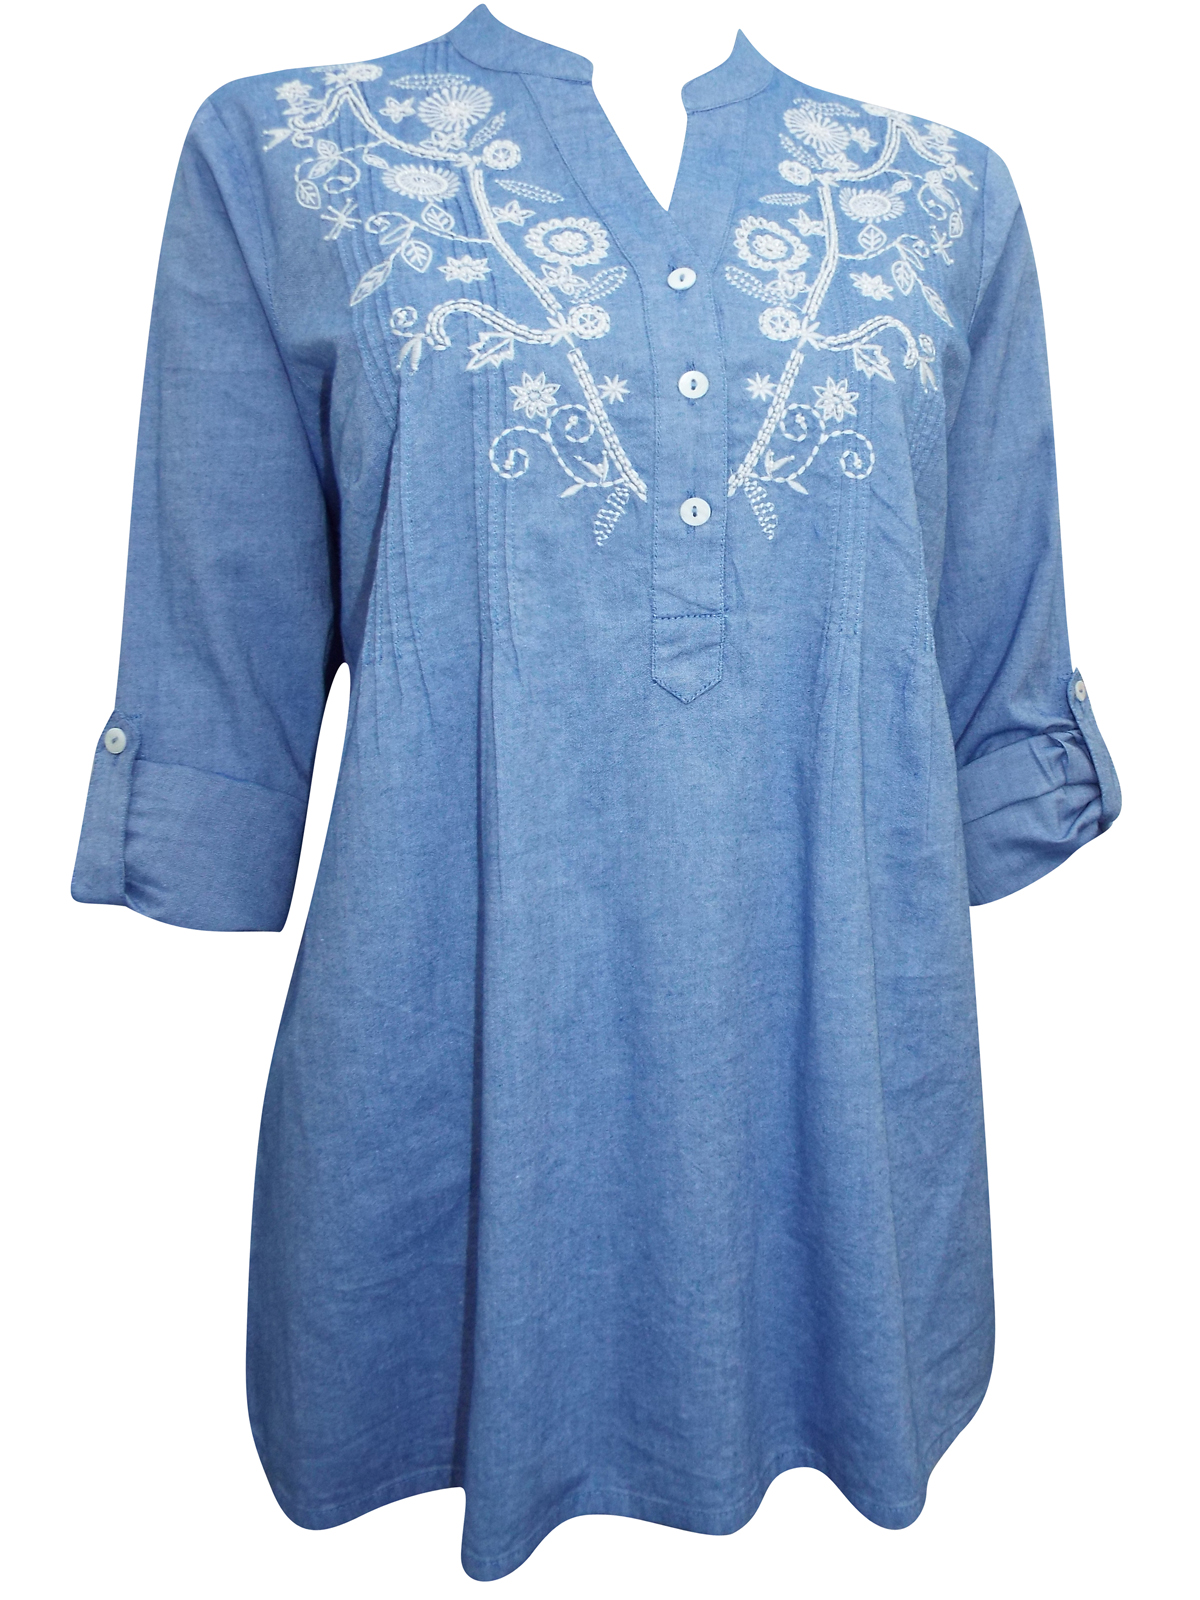 BADER - - B4DER BLUE Floral Embroidered Pintuck Shirt - Size 12 to 28 ...